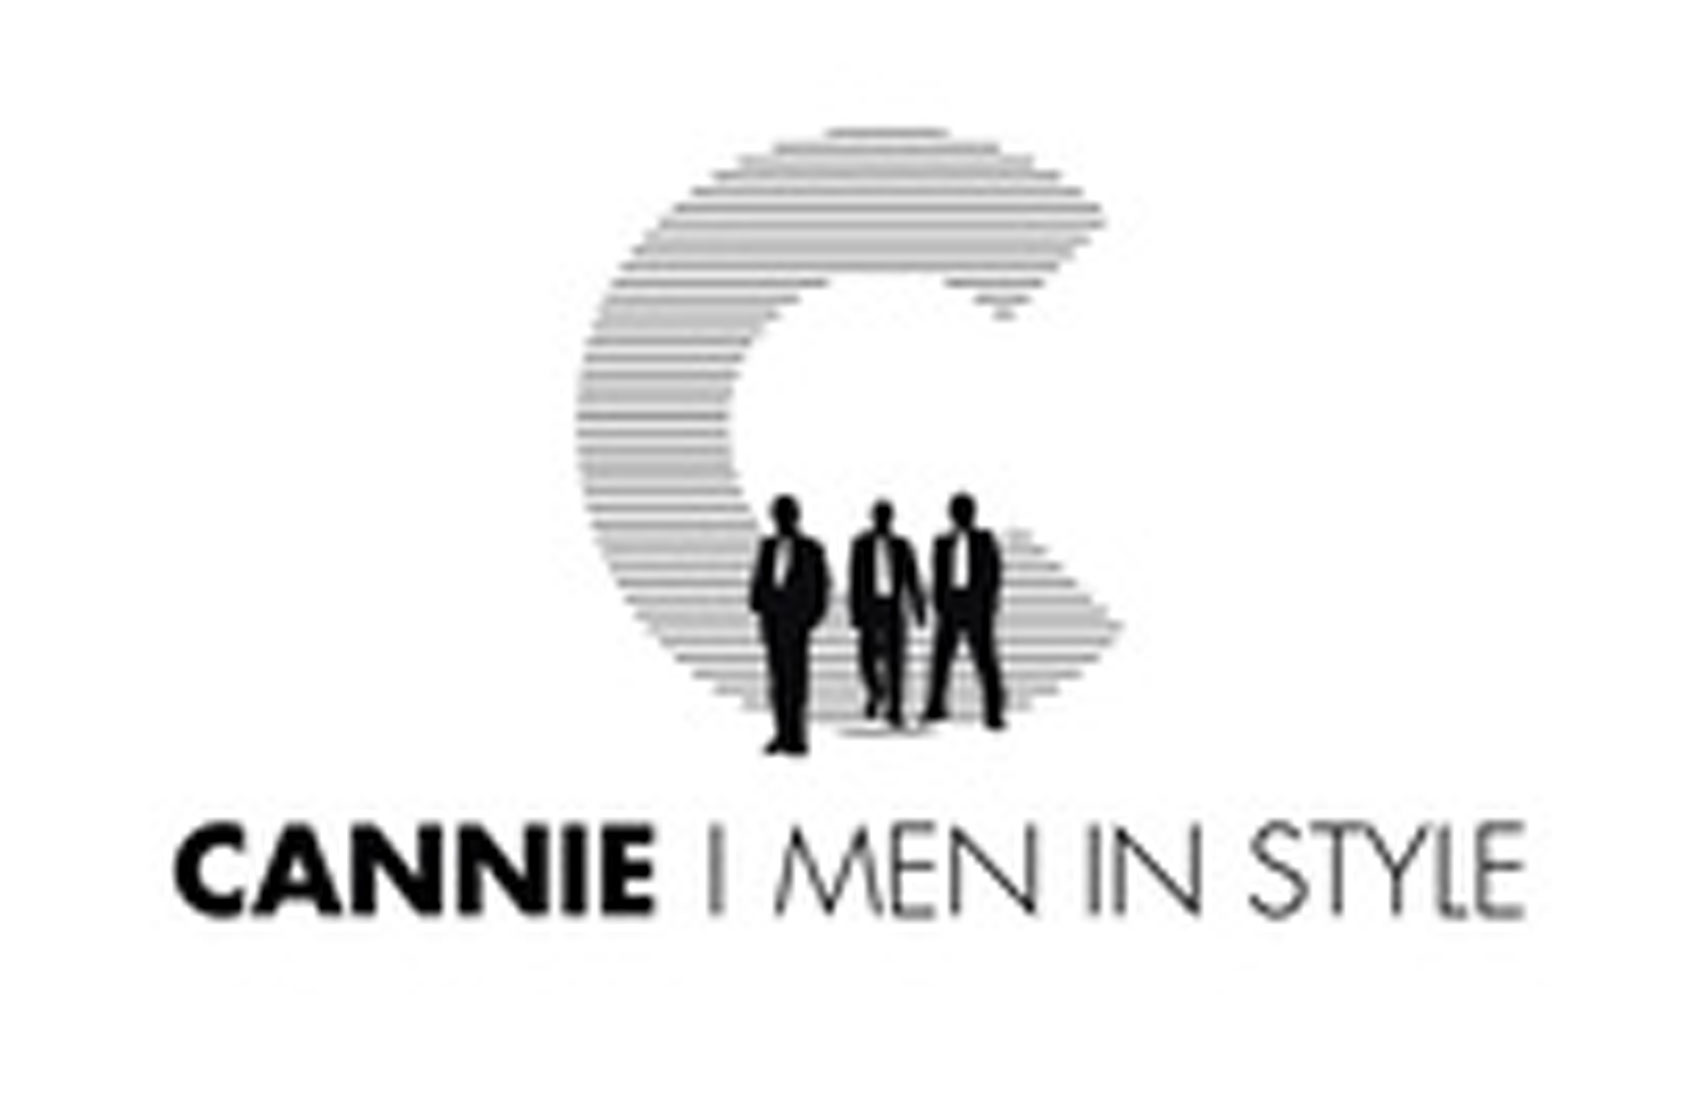 Cannie - Men in style